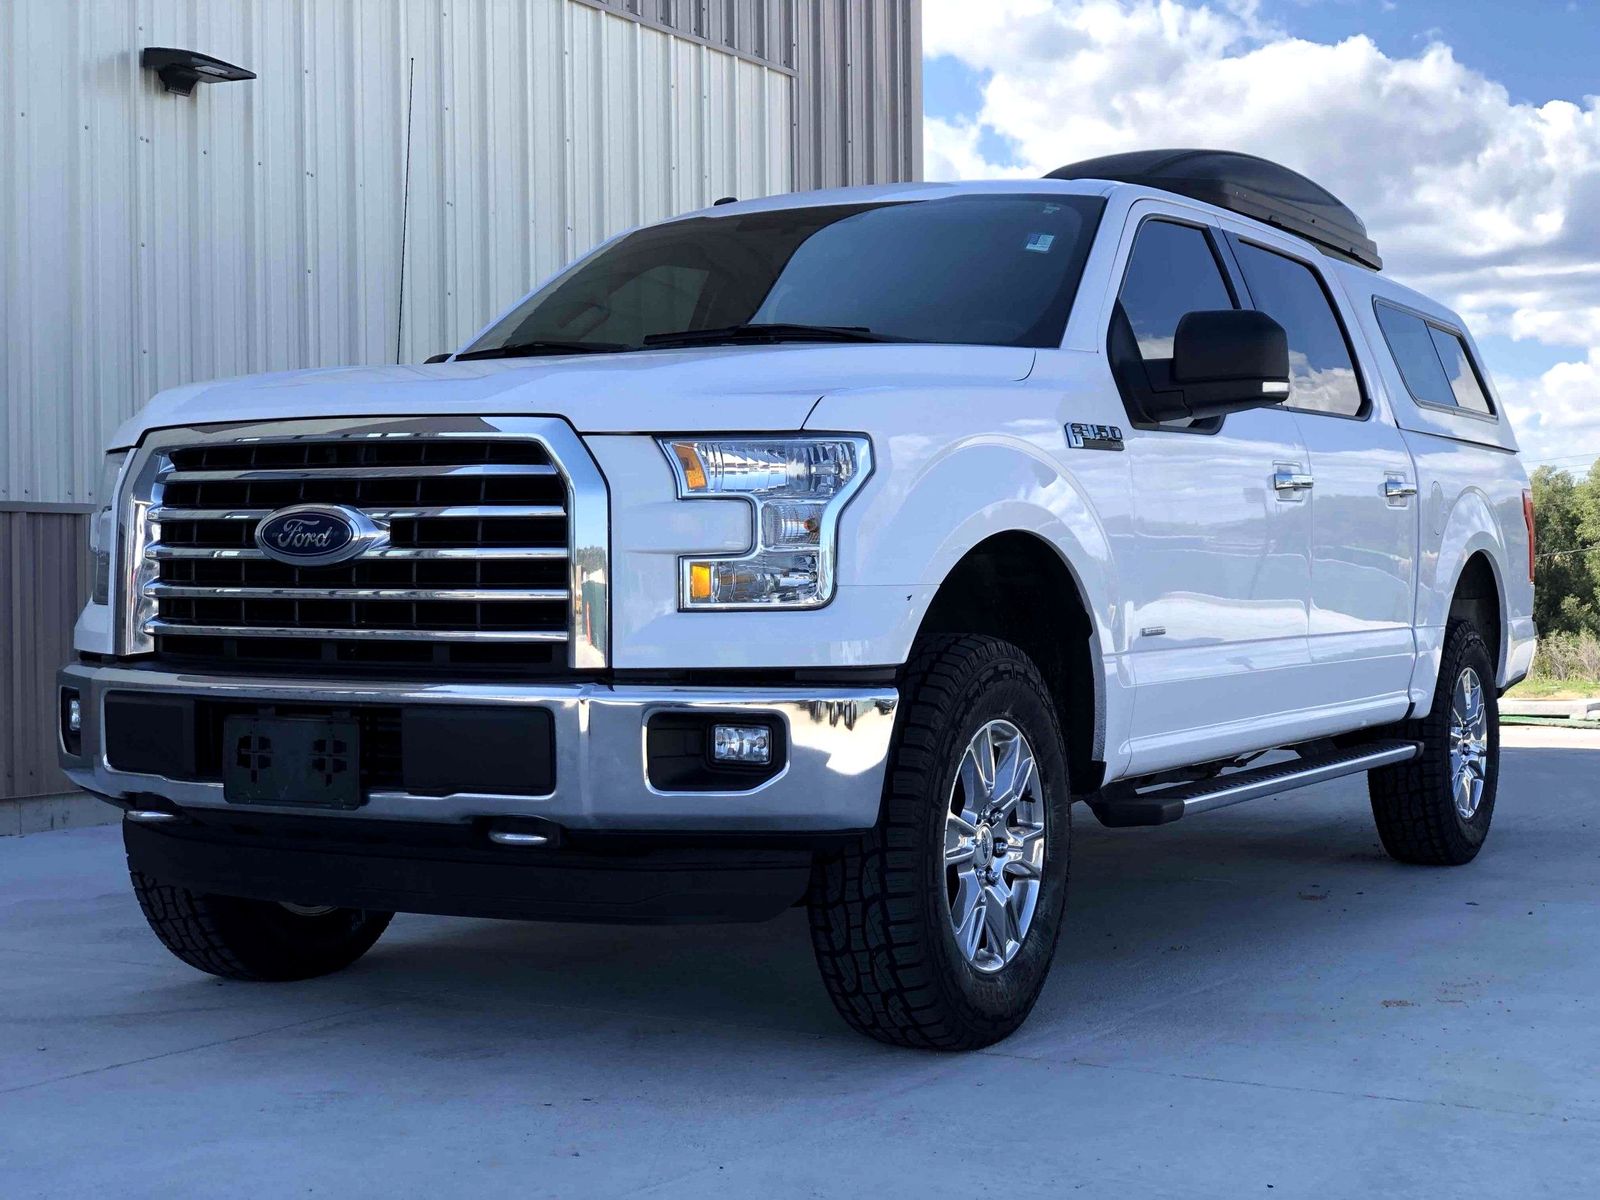 2016 Ford F-150 XLT | Good Car Buys.com 2016 Ford F-150 Xlt Supercrew 4wd Towing Capacity